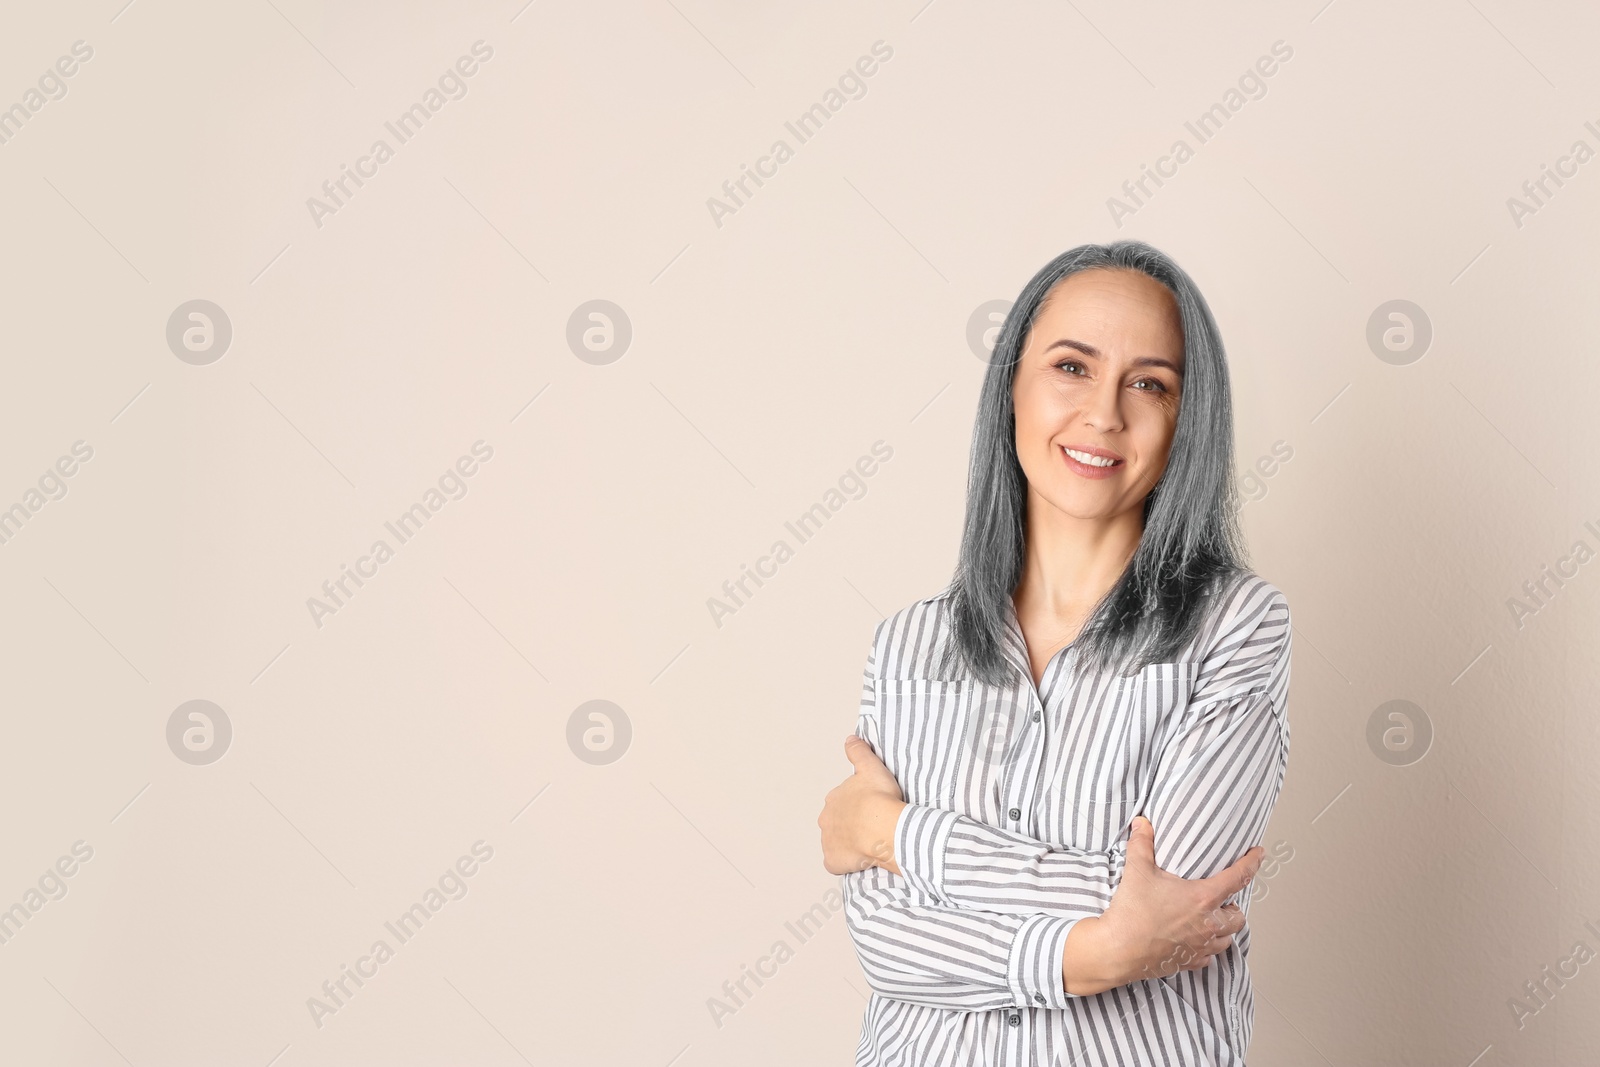 Image of Portrait of smiling woman with ash hair color on beige background. Space for text